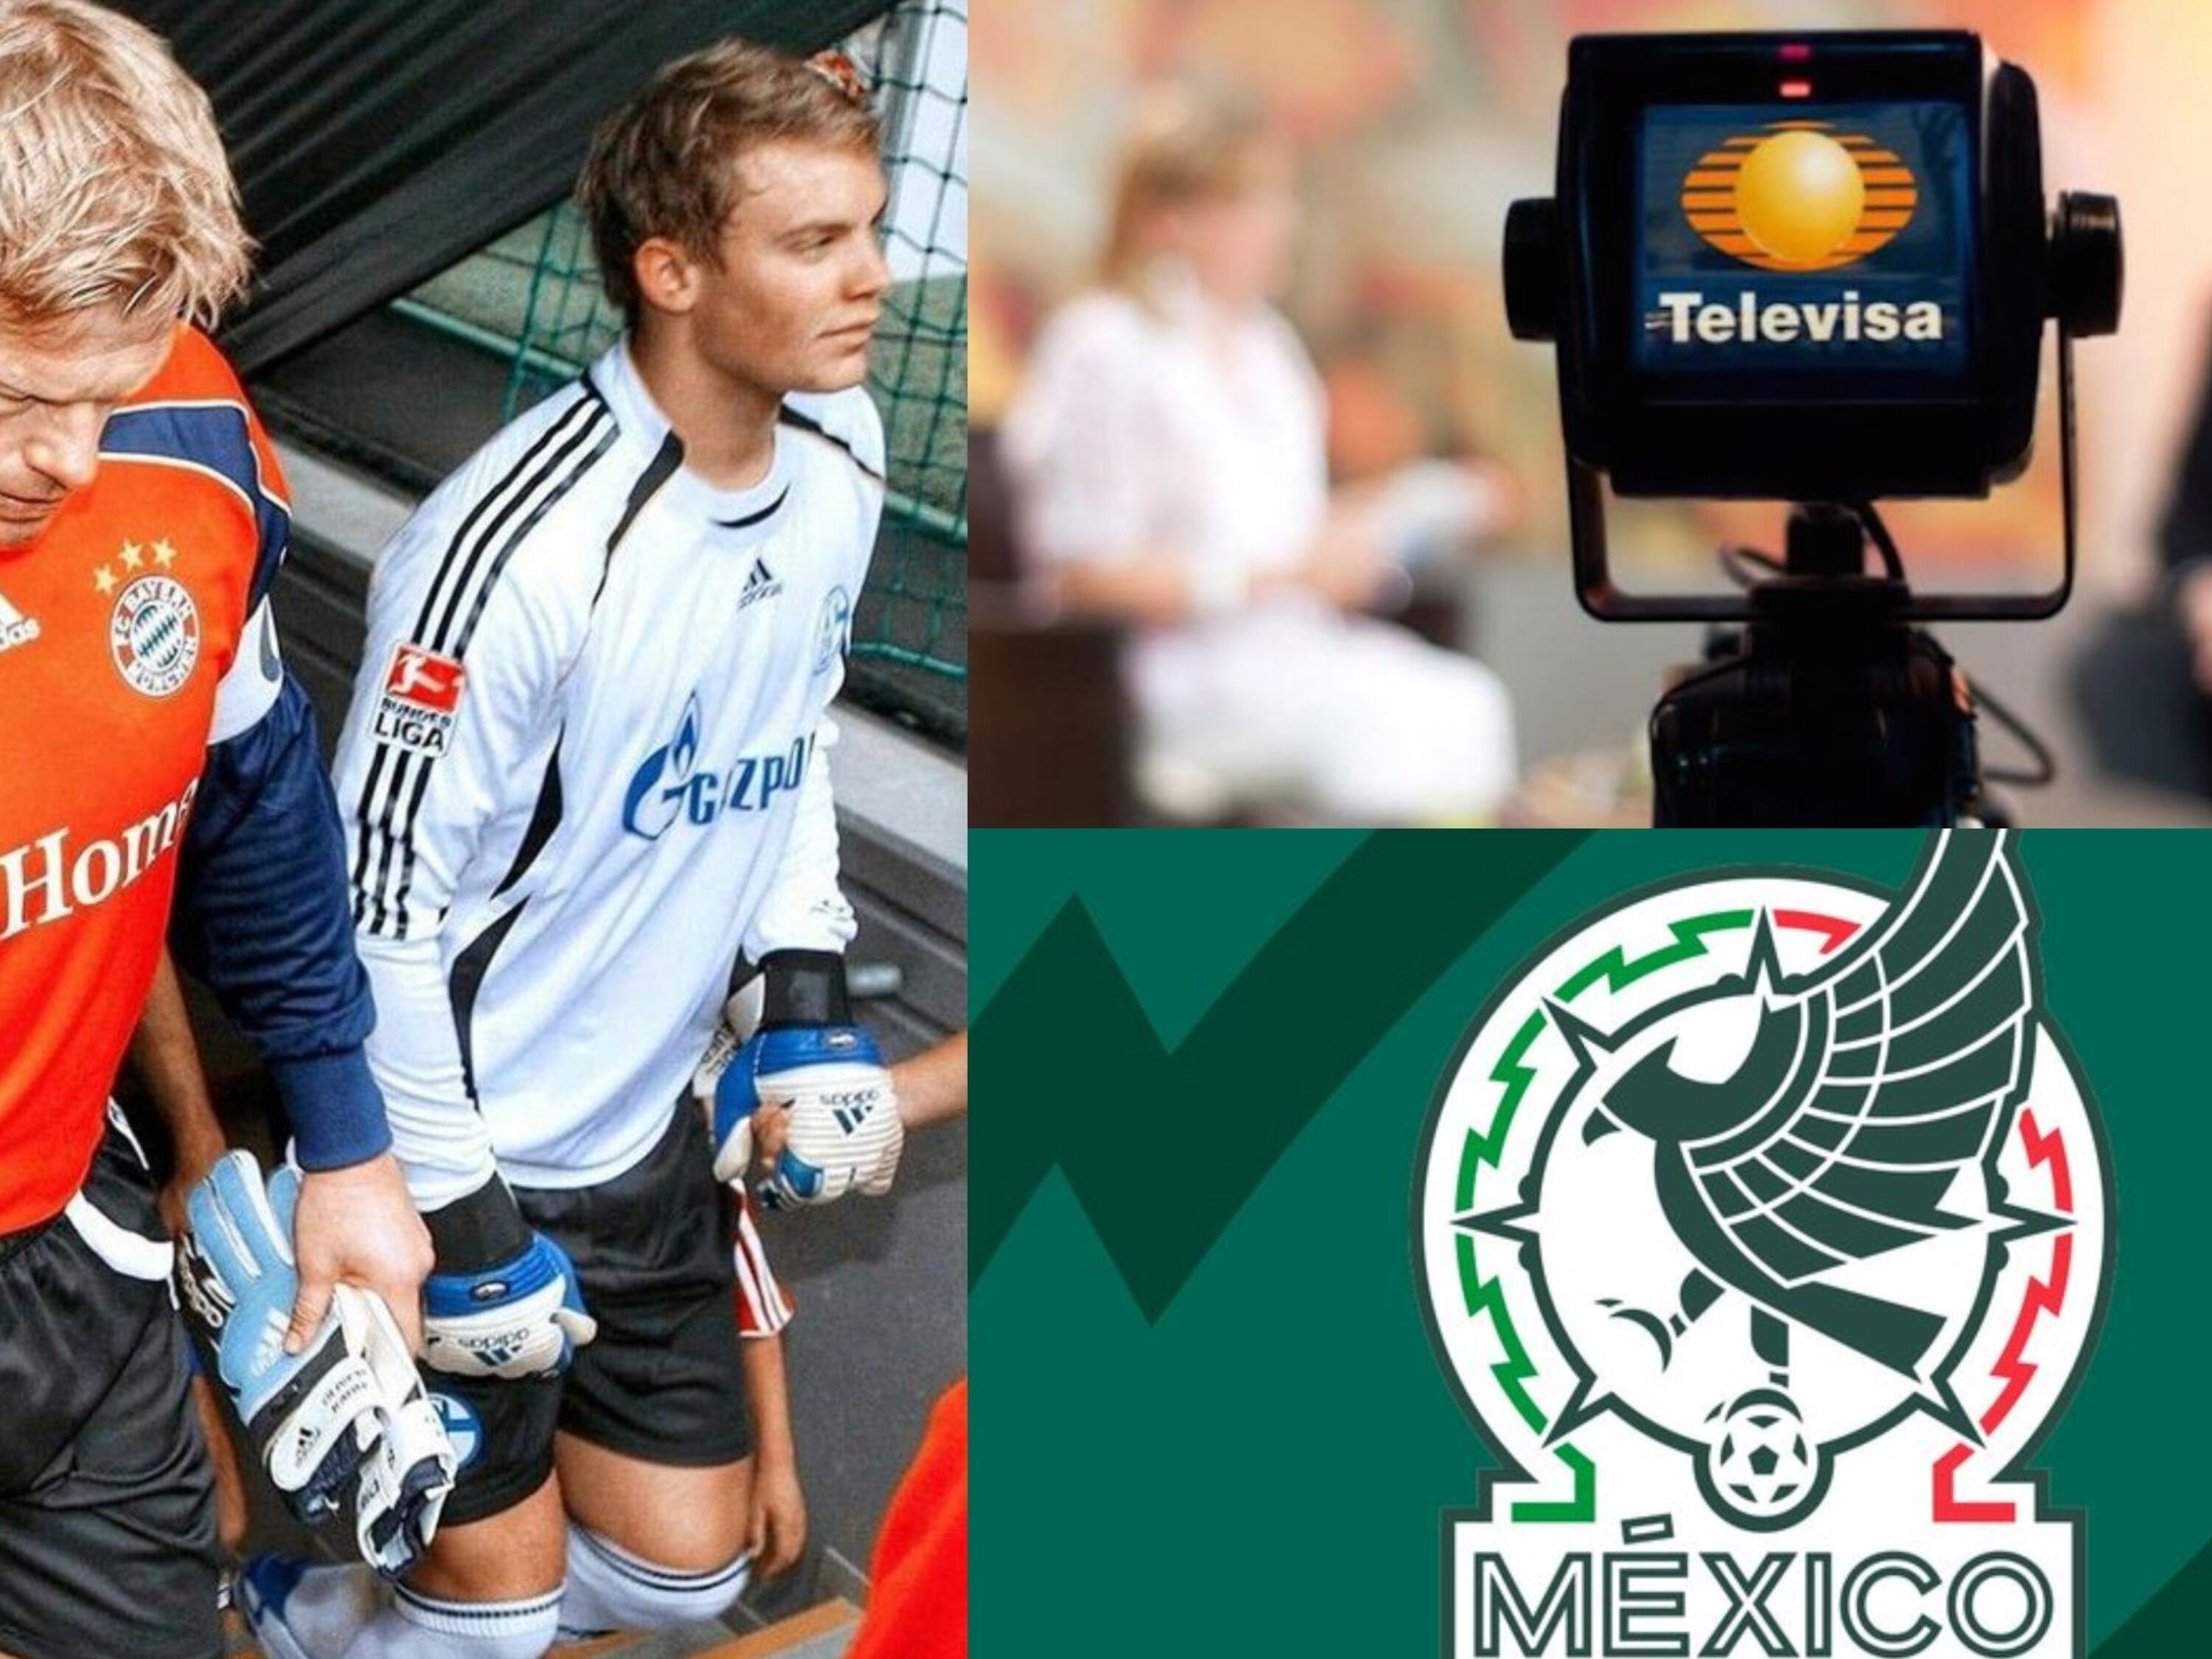 He scored a goal to the best goalkeeper in the world, failed in El Tri, now he sells out to Televisa